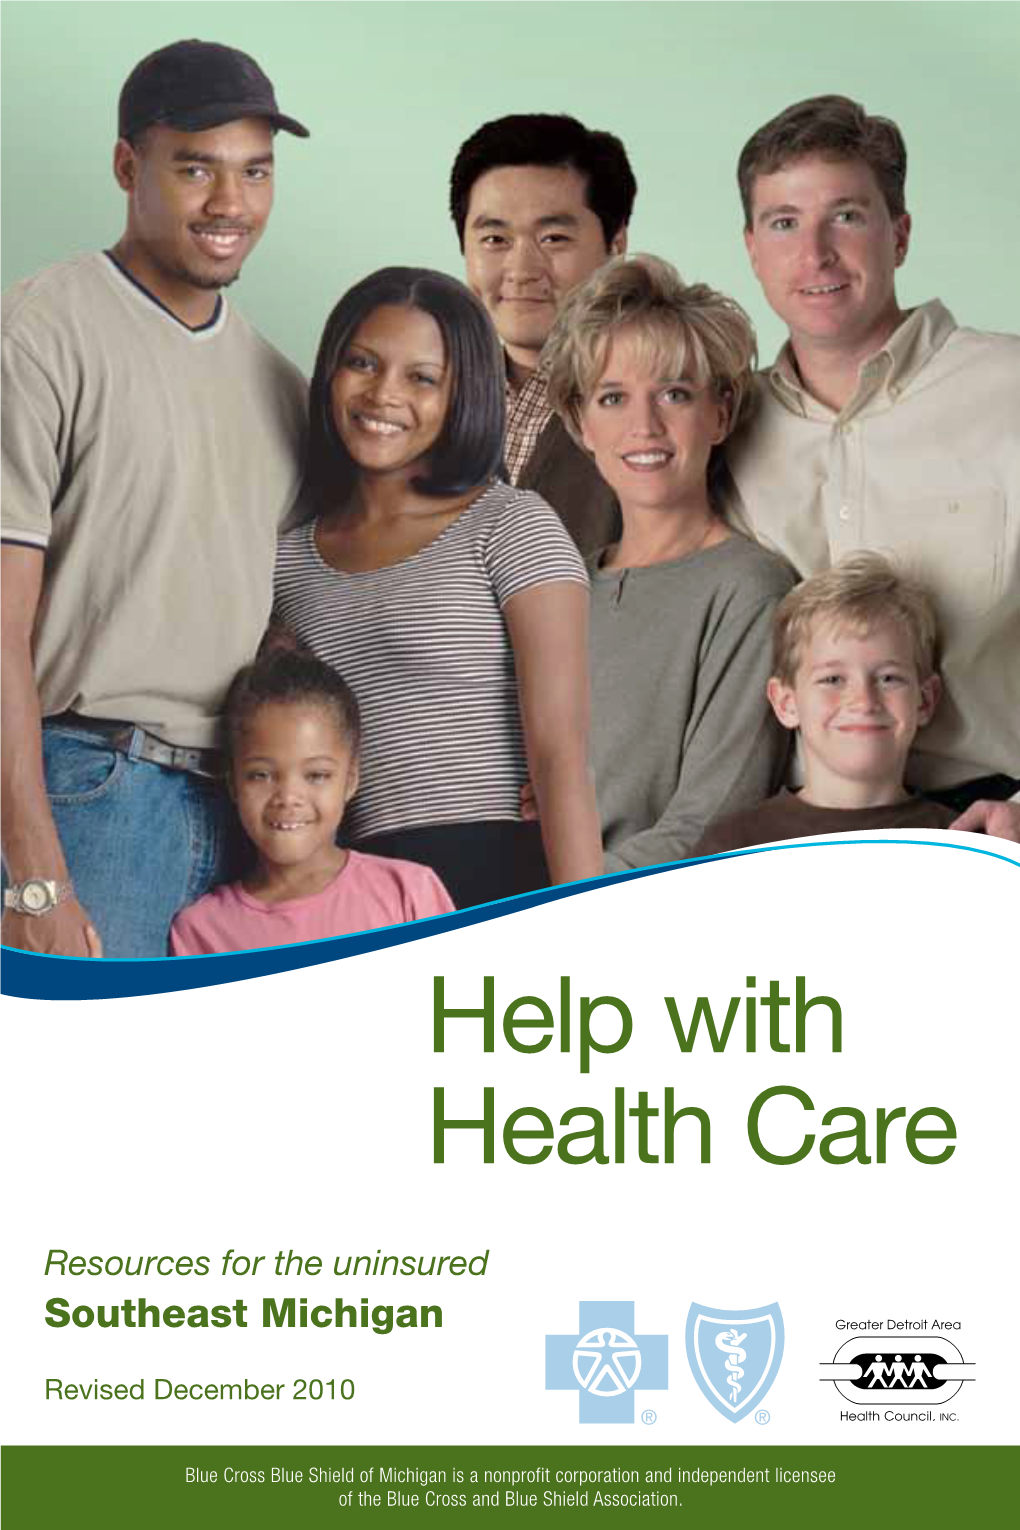 Southeast Michigan Help with Health Care